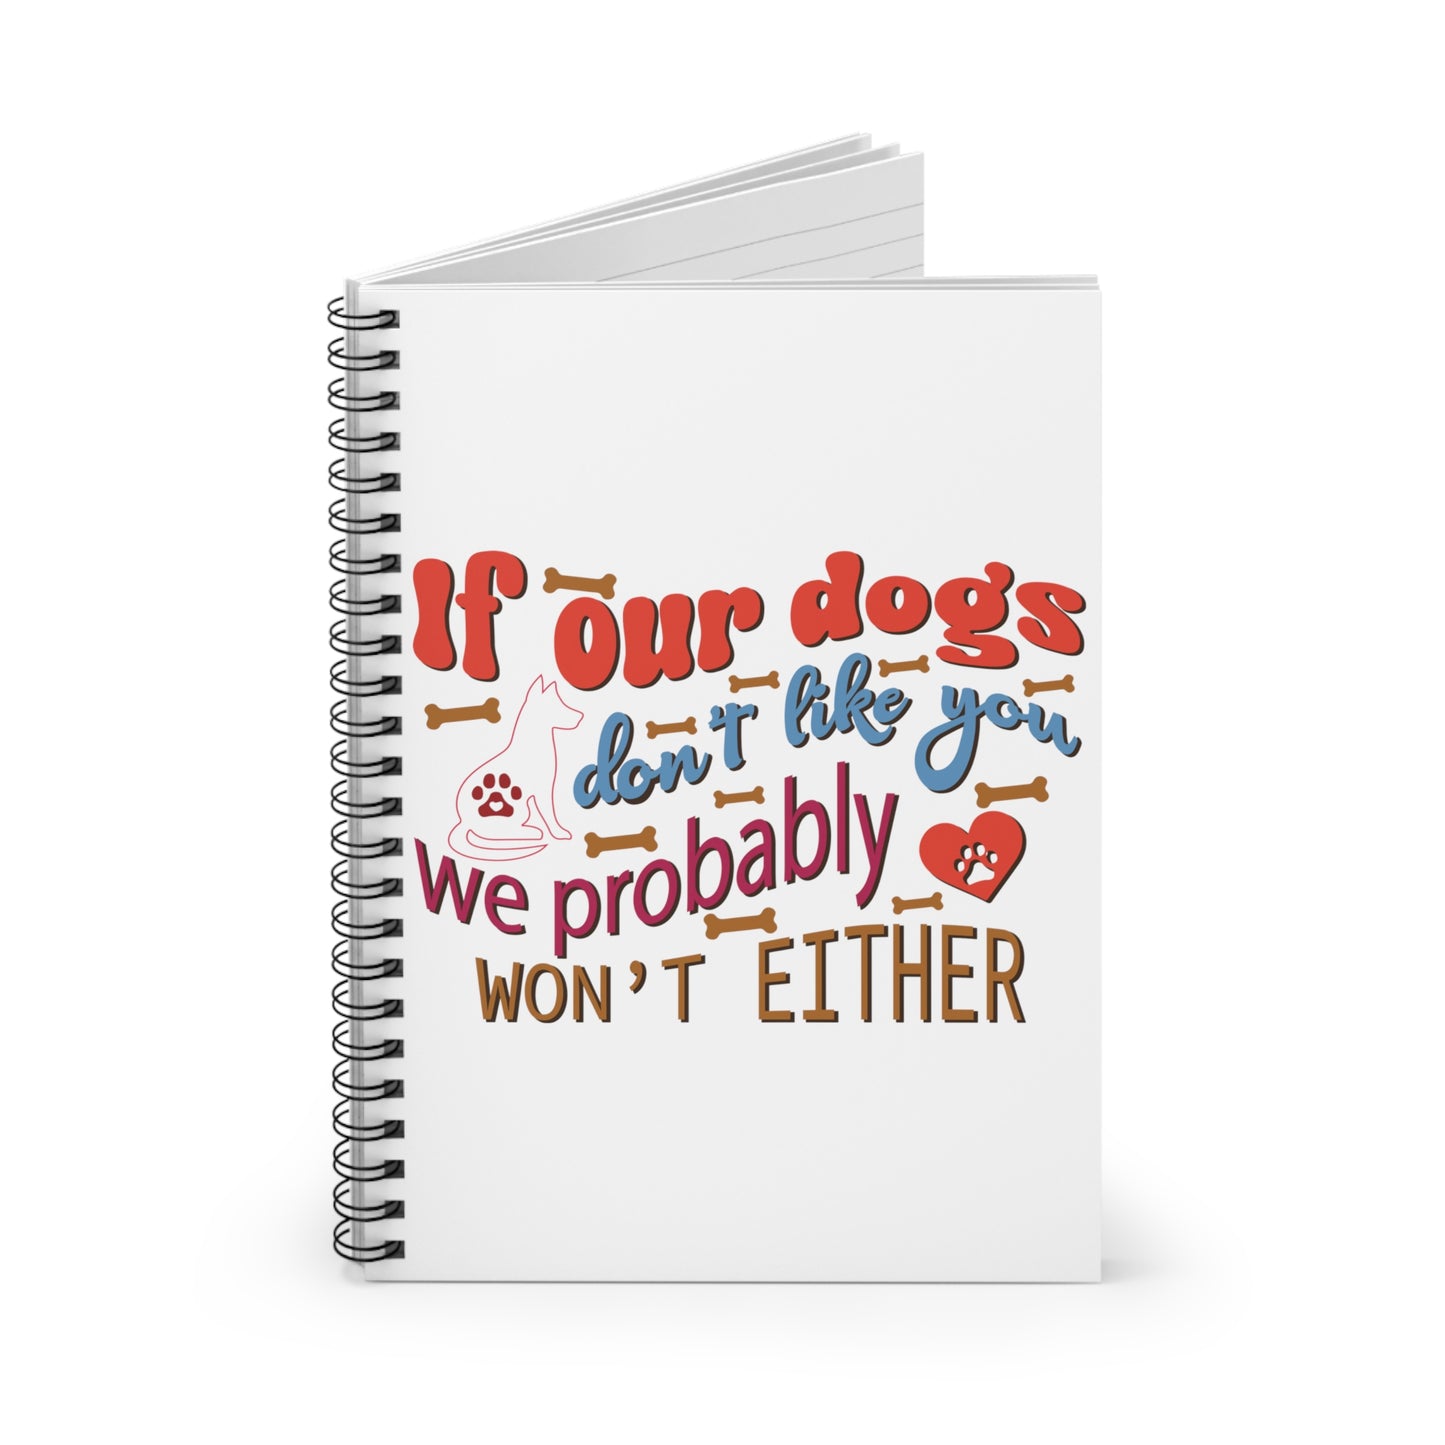 Dogs Don't Like You: Spiral Notebook - Log Books - Journals - Diaries - and More Custom Printed by TheGlassyLass